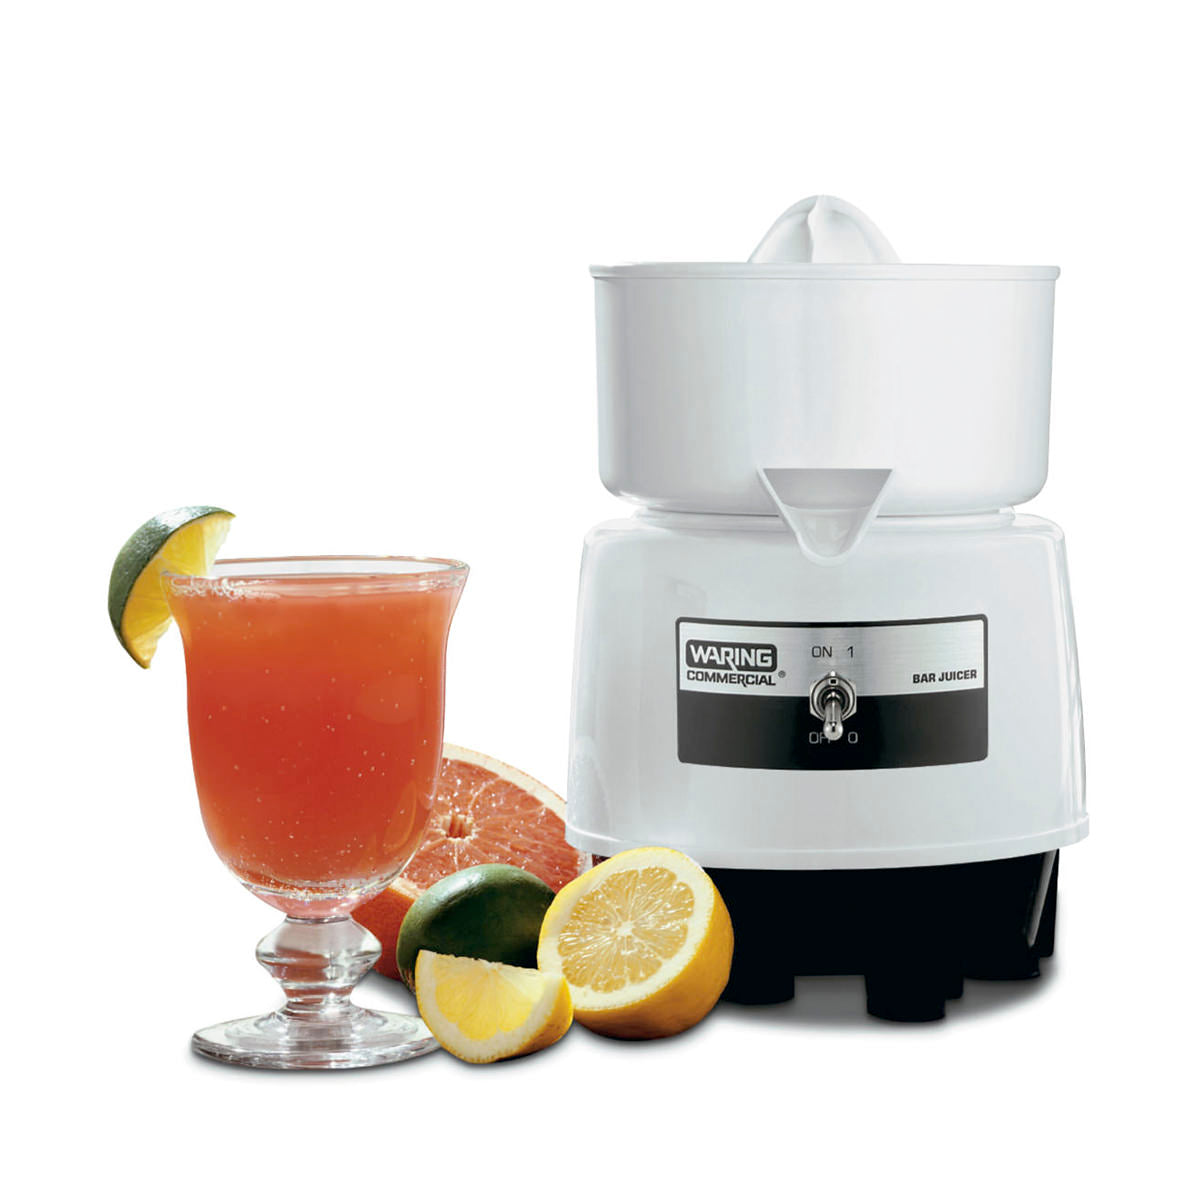 BJ120C Compact Citrus Bar Juicer by Waring Commercial